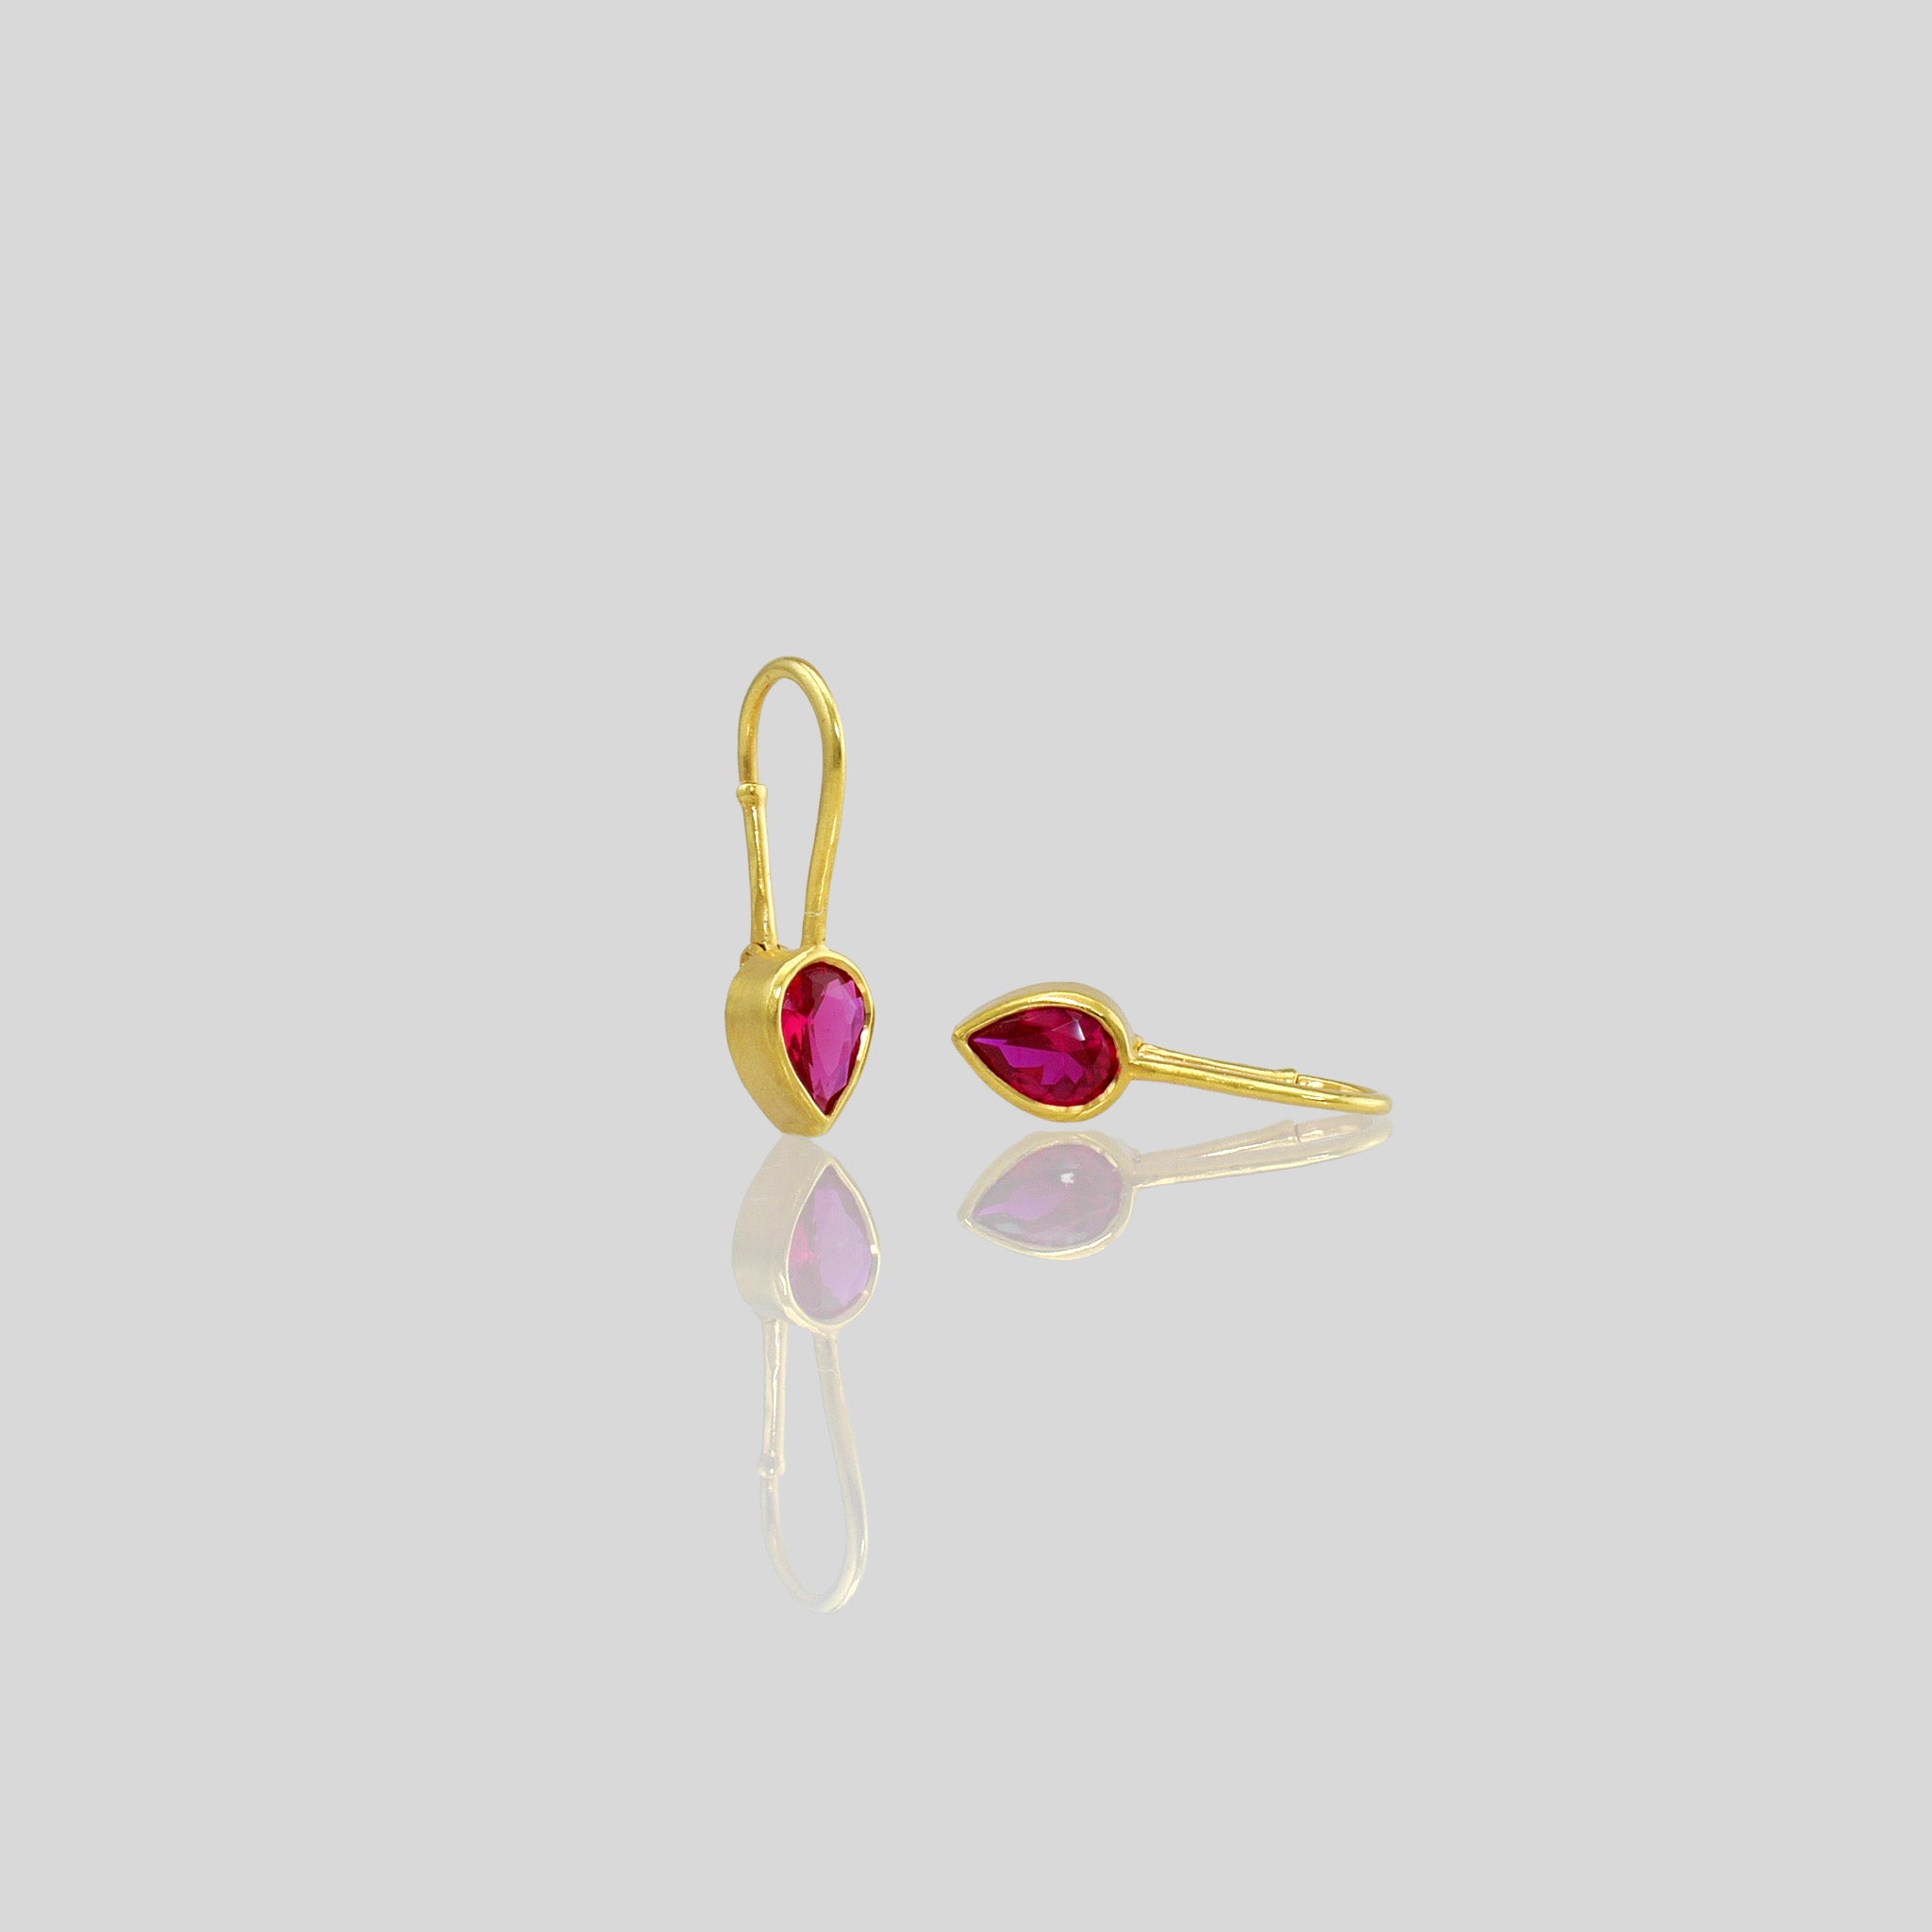 Lightweight gold earrings featuring  a drop-shaped Ruby gemstone and promote spiritual harmony 